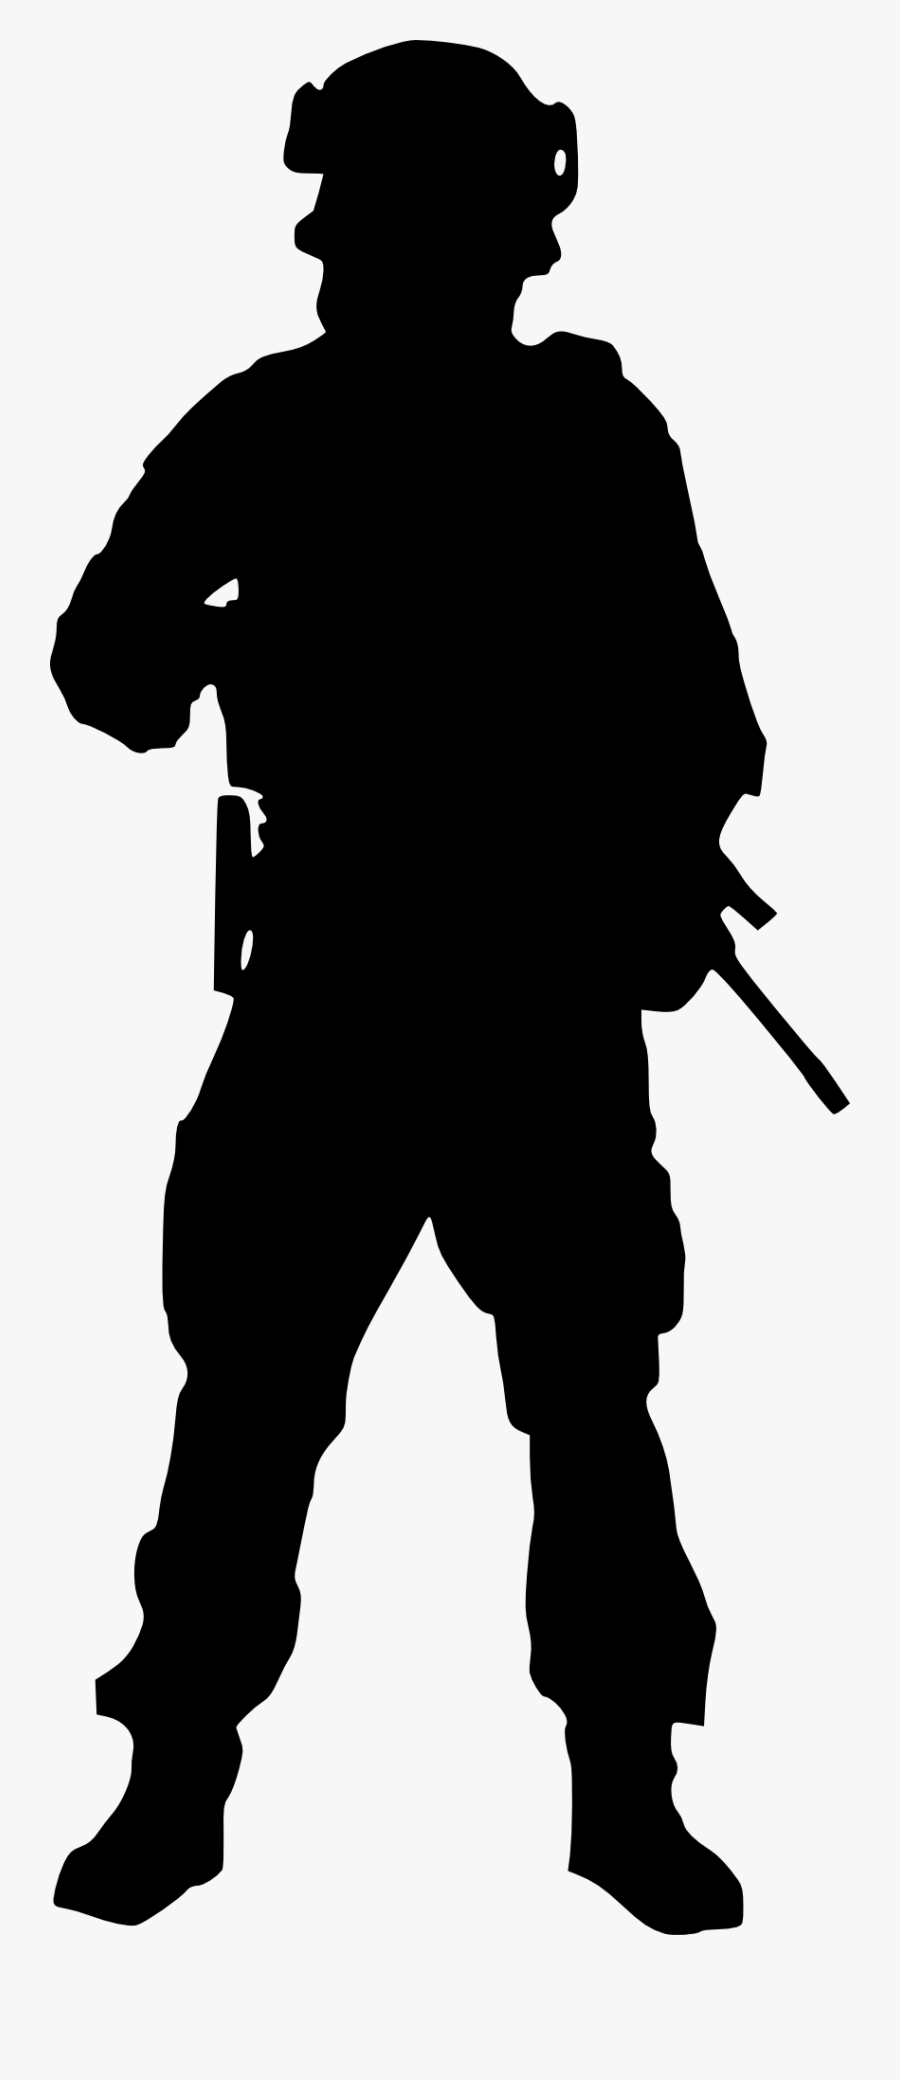 Army Clipart Transparent - Soldier Silhouette Transparent Background, Transparent Clipart